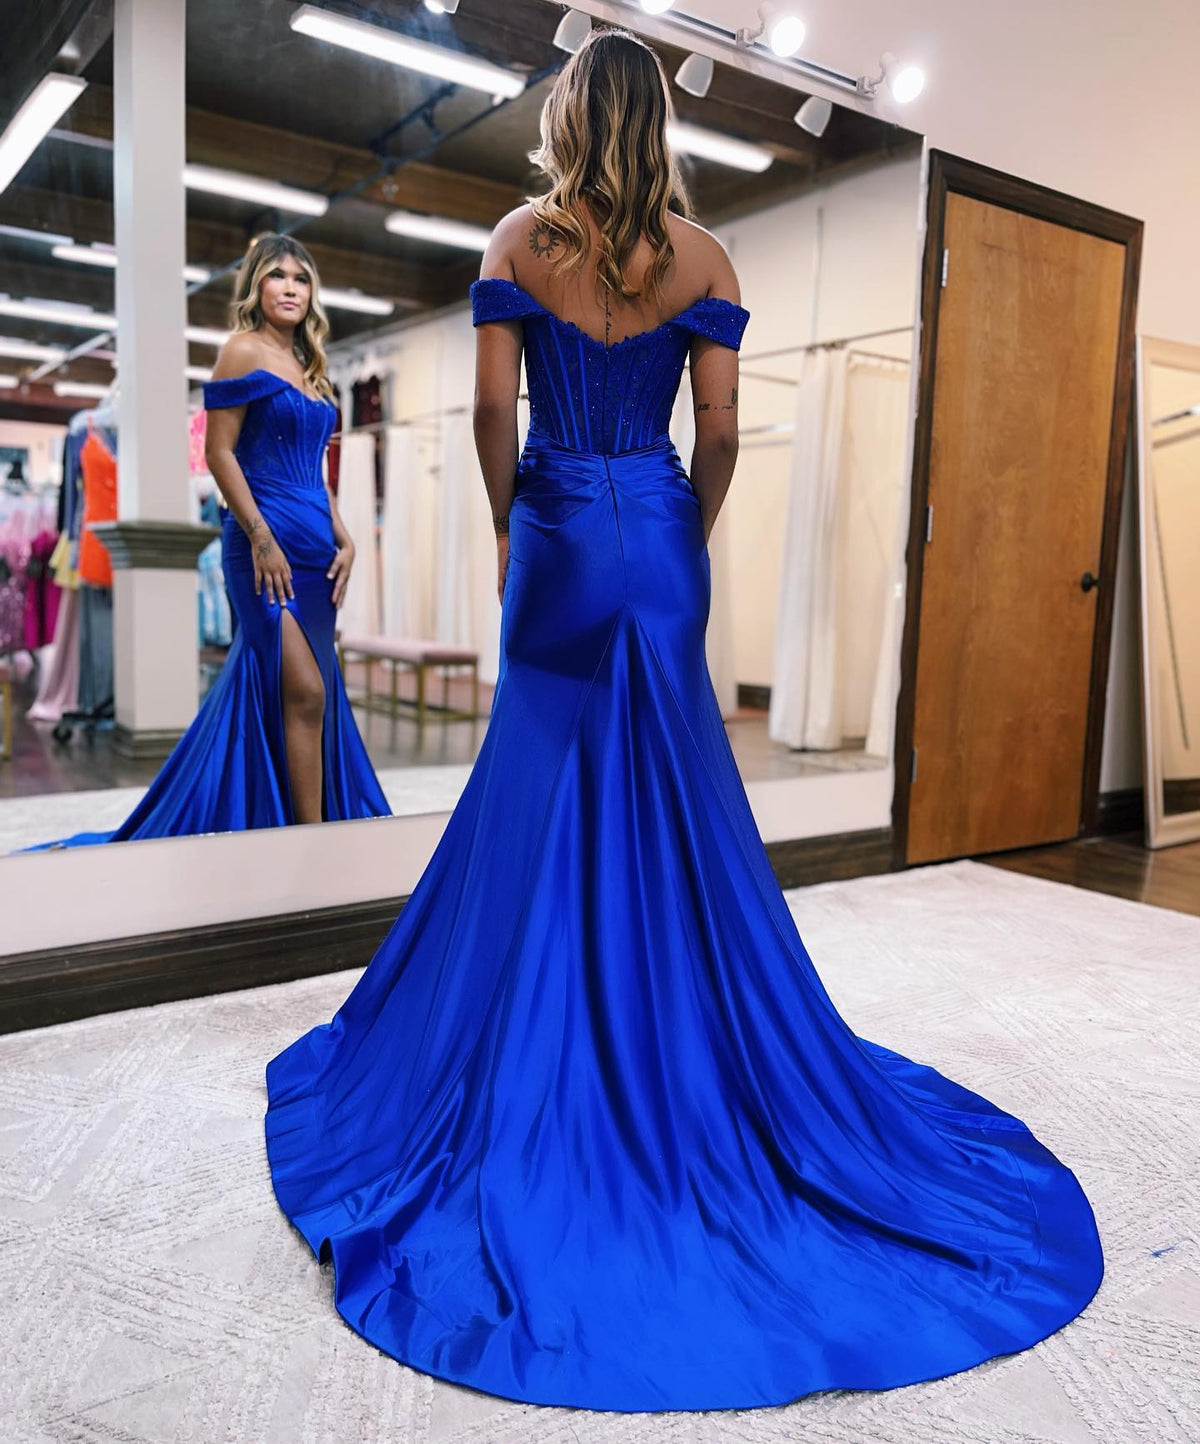 Off-the-Shoulder Satin Lace Mermaid Long Prom Gown